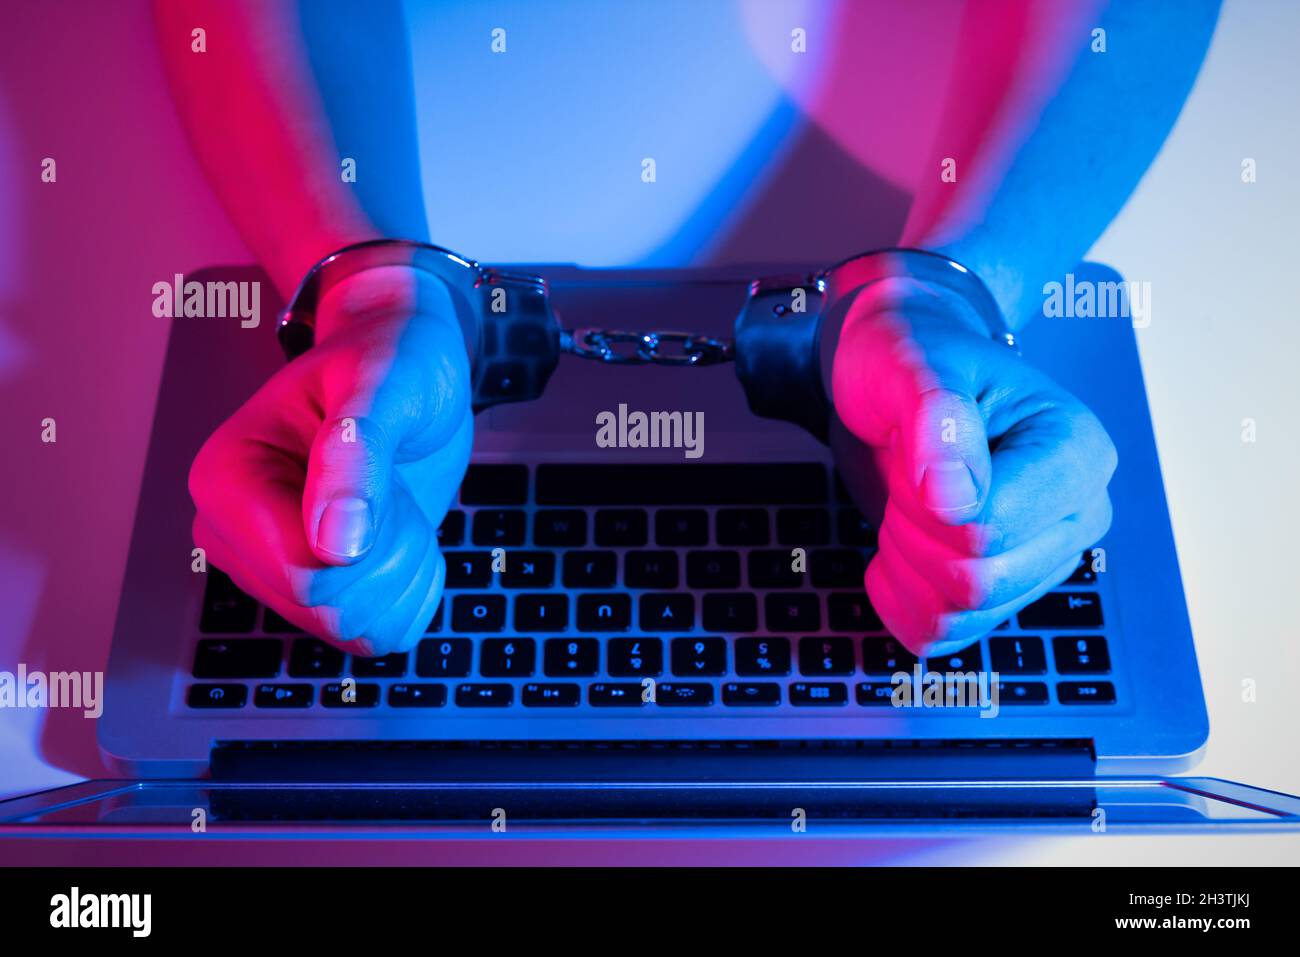 Cyber crime concept with man in handcuffs. Phishing attack, malware Stock Photo